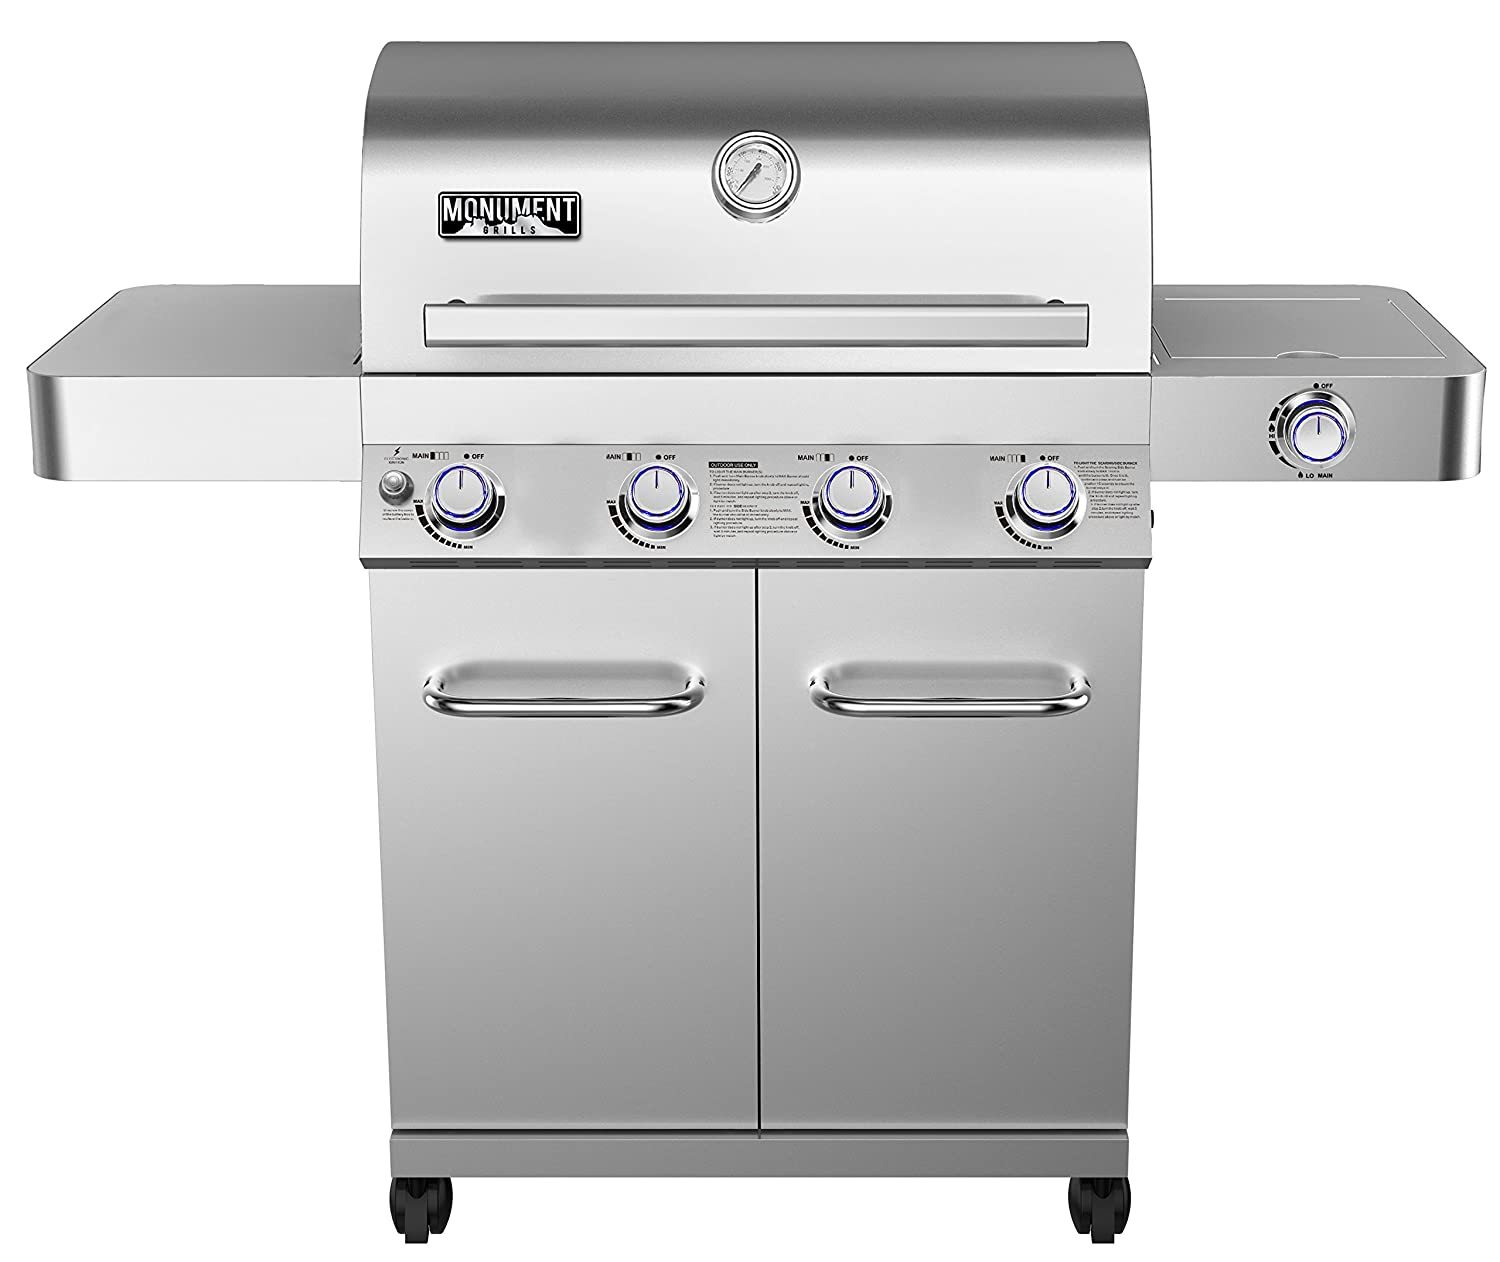 Monument Grills Stainless Steel 4 Burner Propane Gas Grill